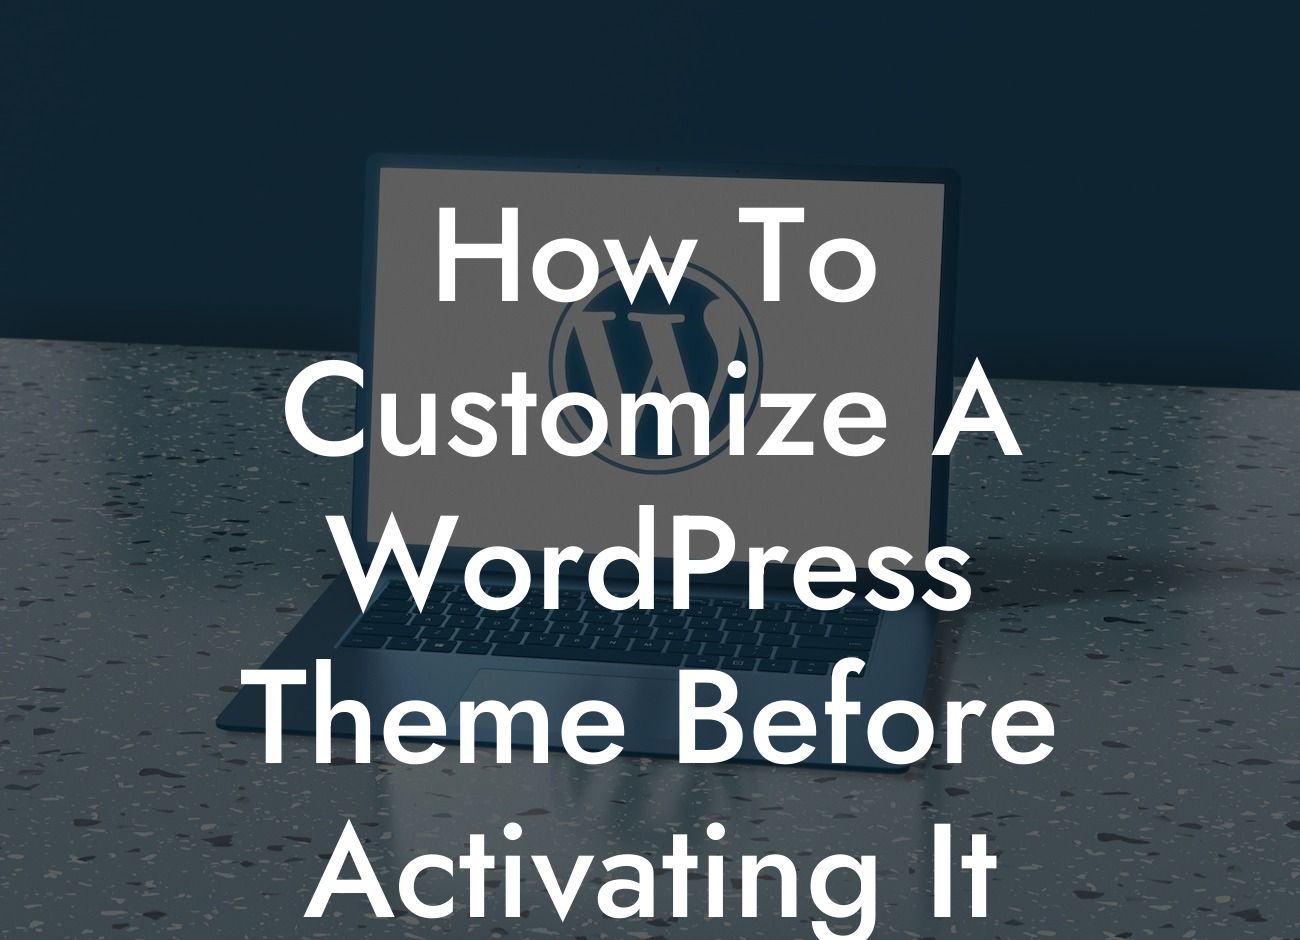 How To Customize A WordPress Theme Before Activating It